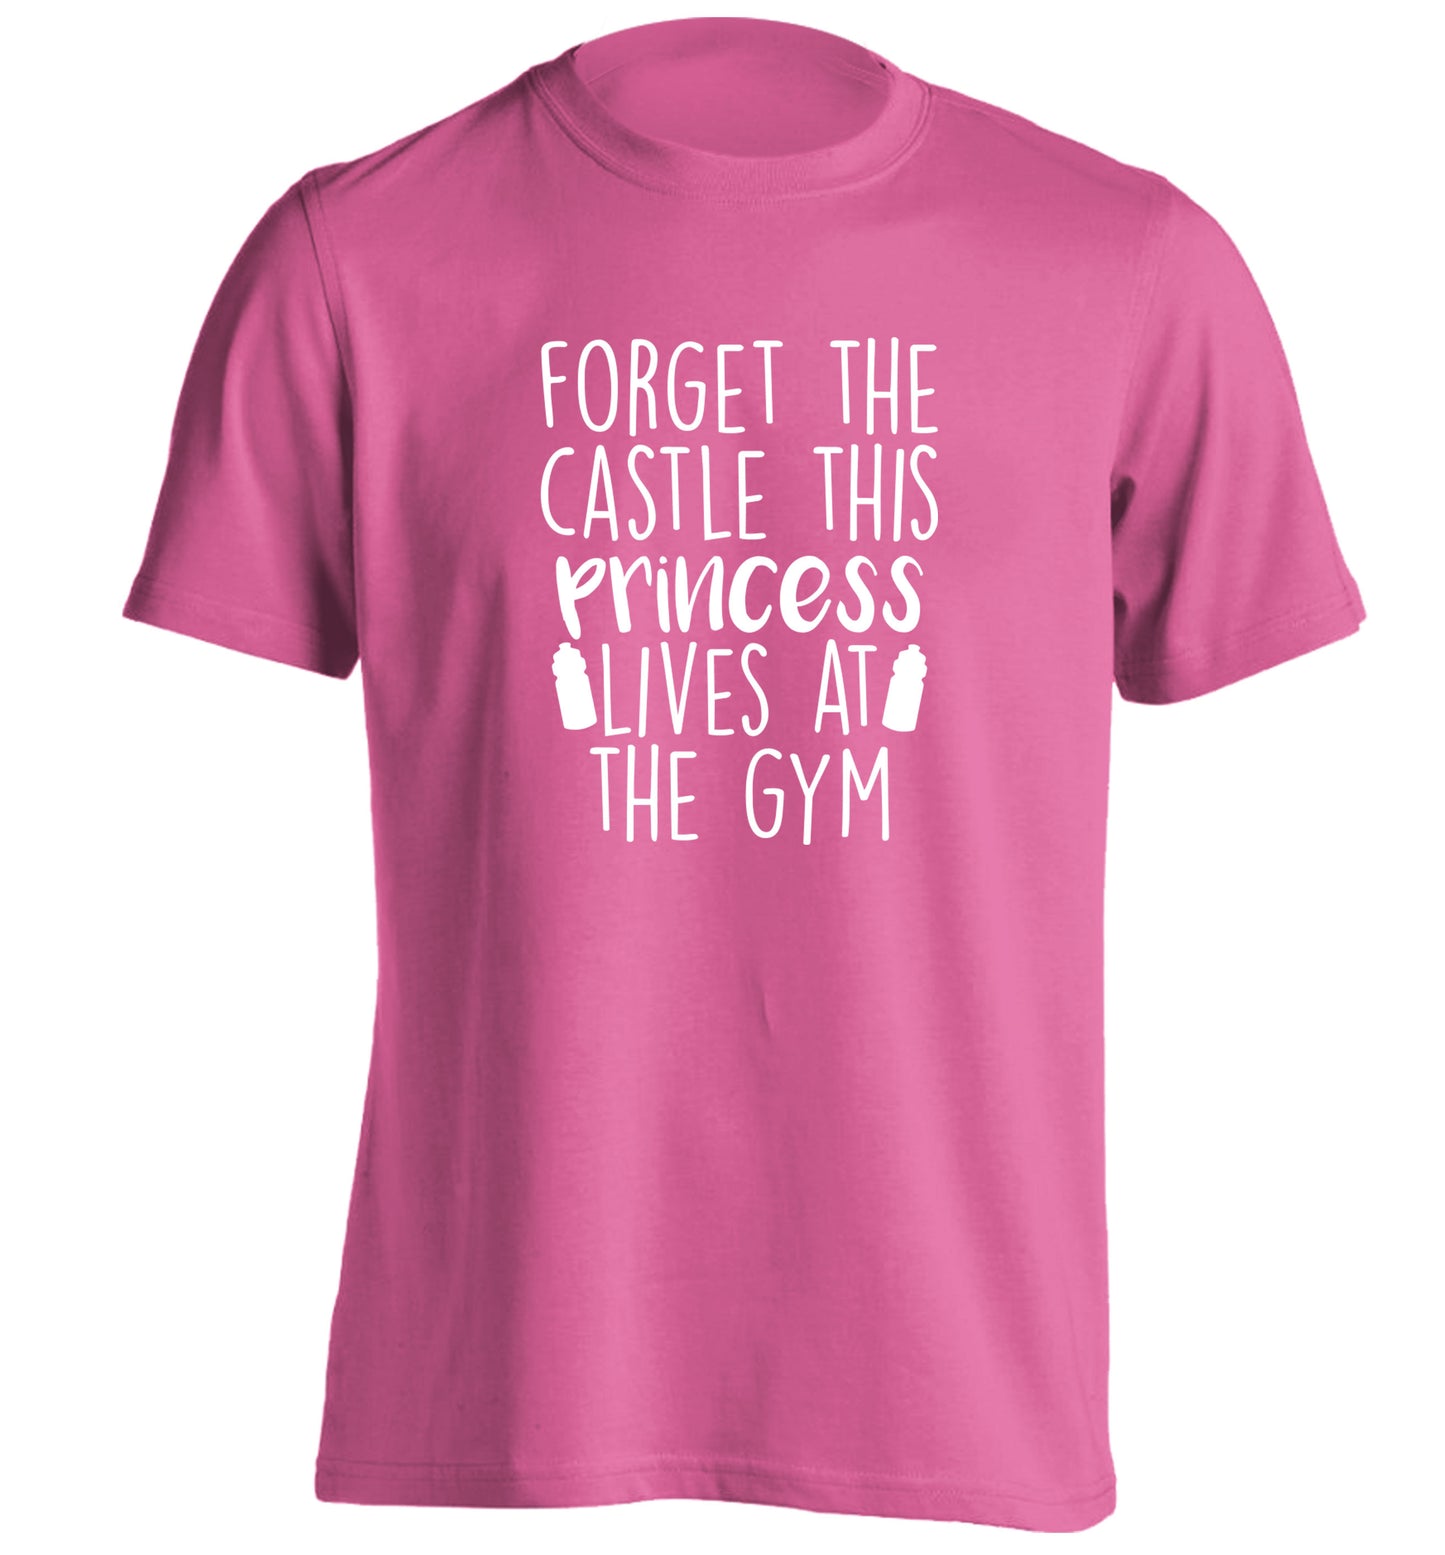 Forget the castle this princess lives at the gym adults unisex pink Tshirt 2XL